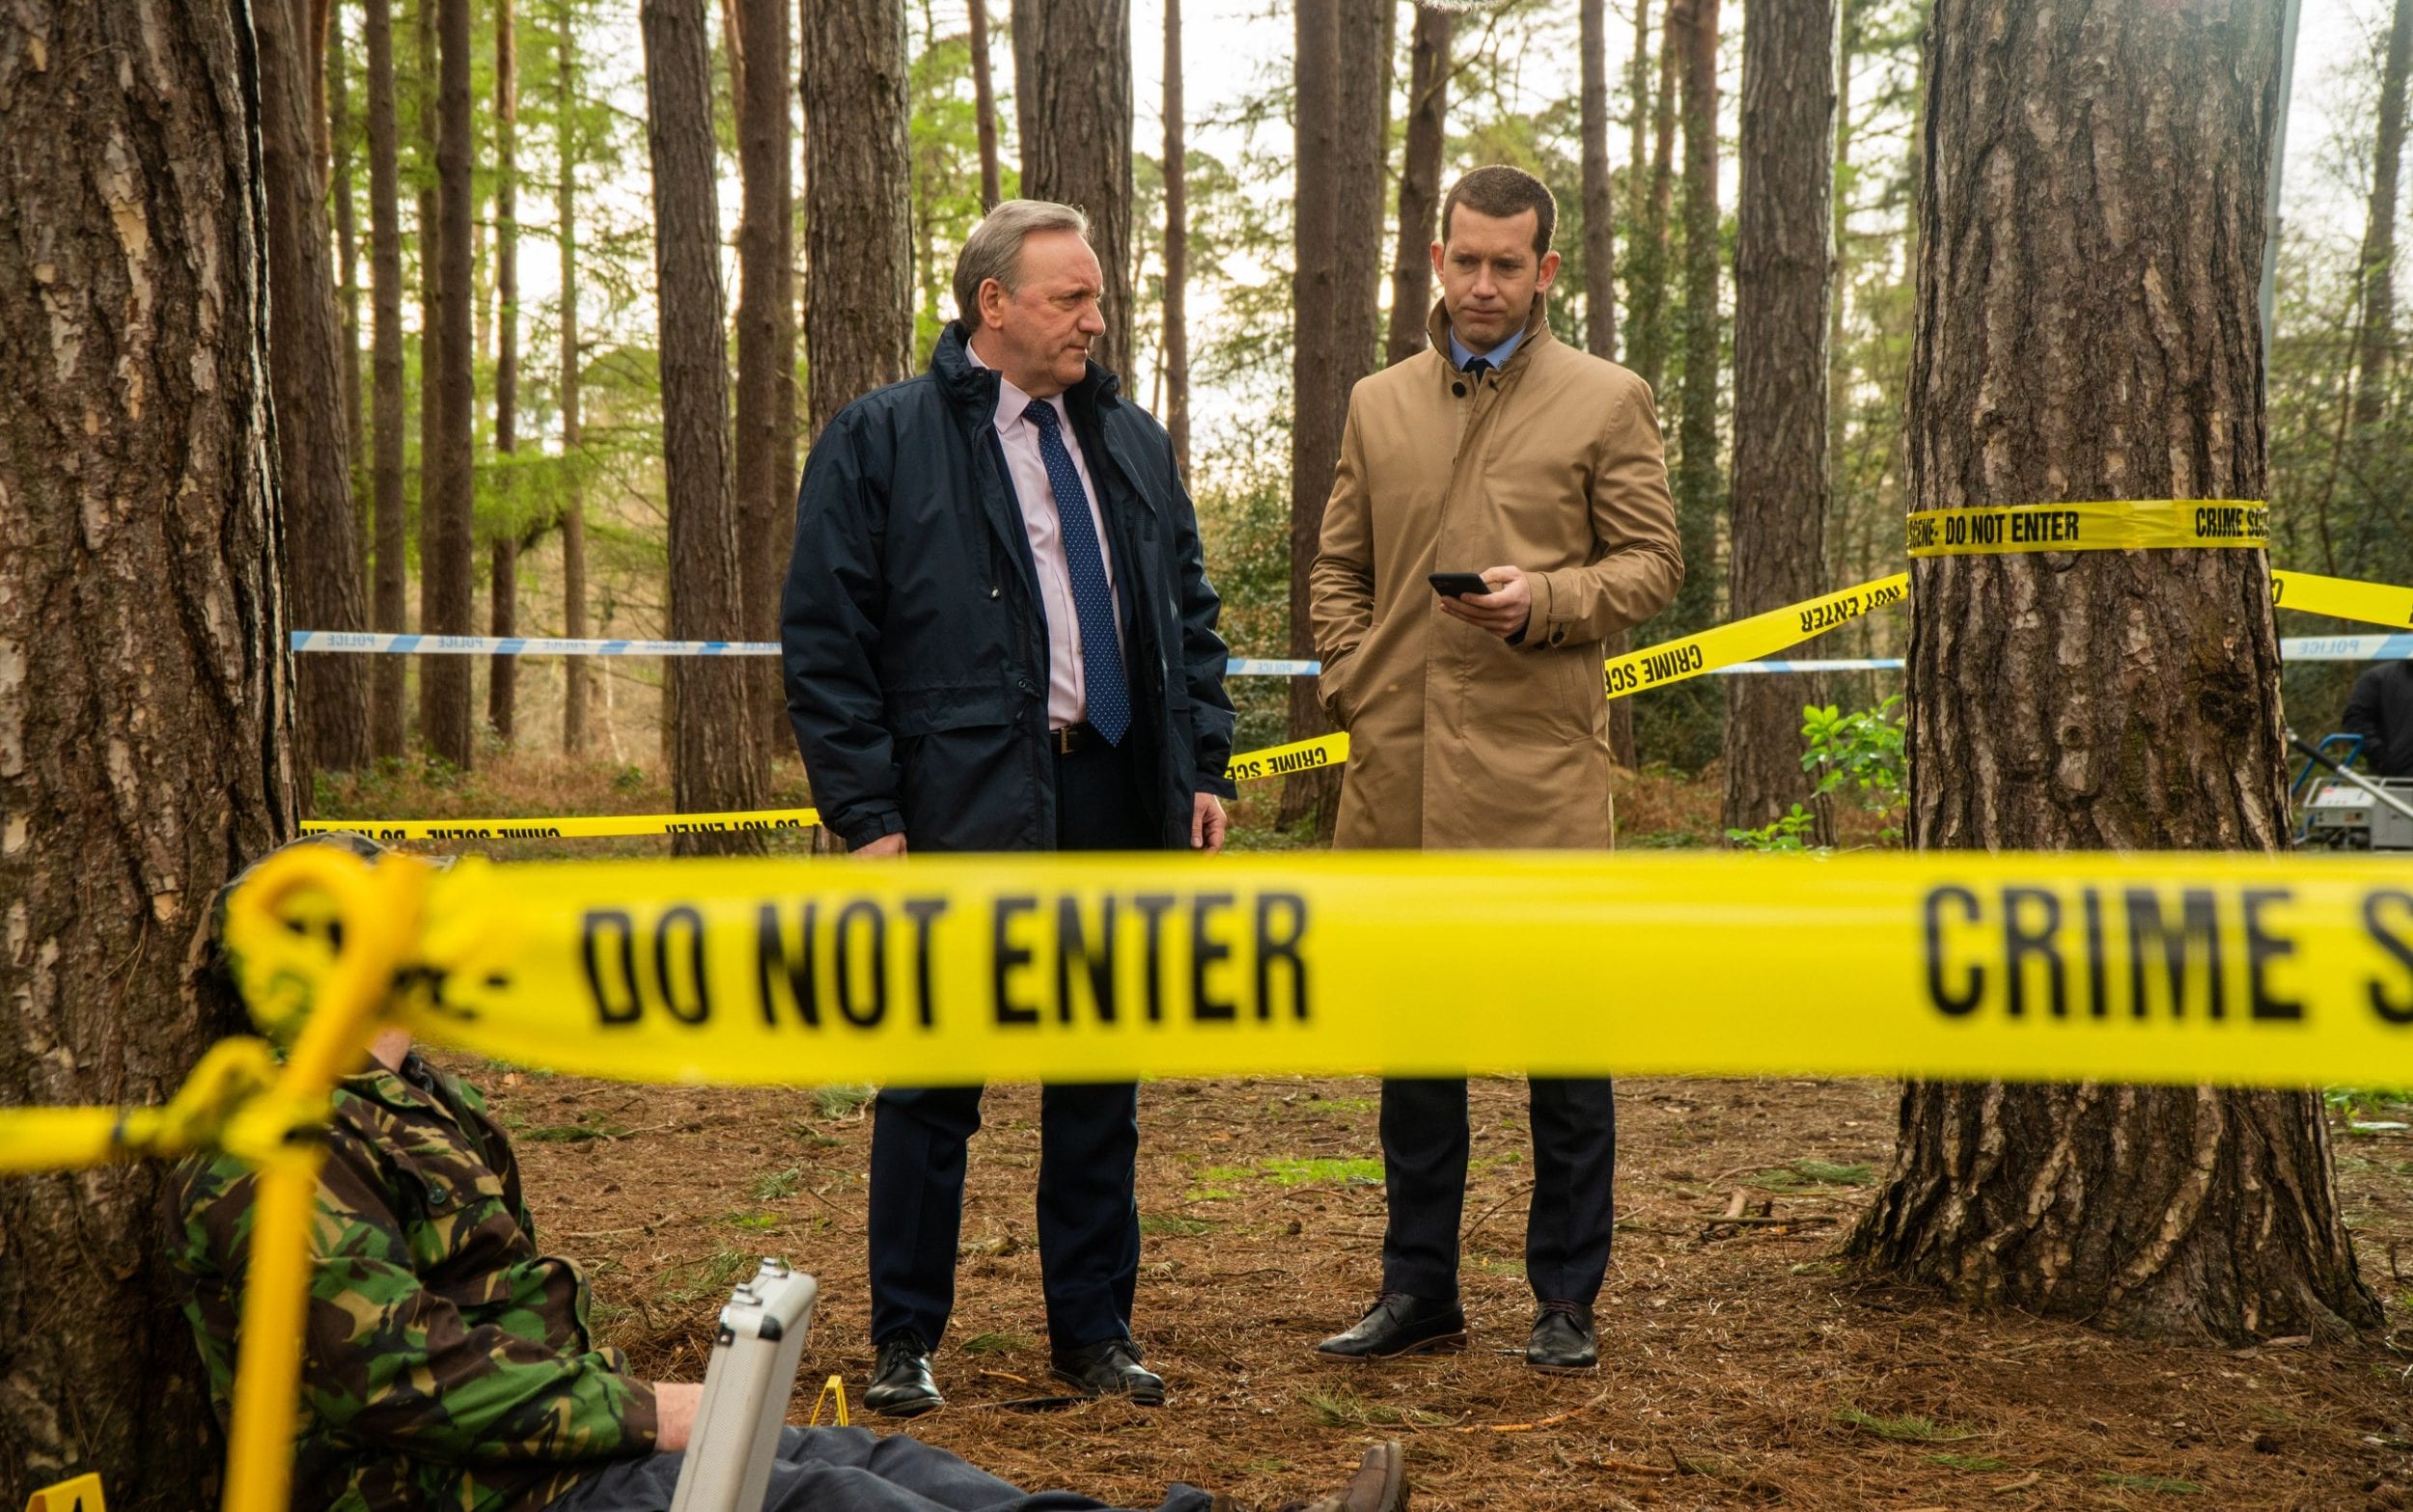 midsomer murders, series 23, review: warning – this show has reached hokum overload